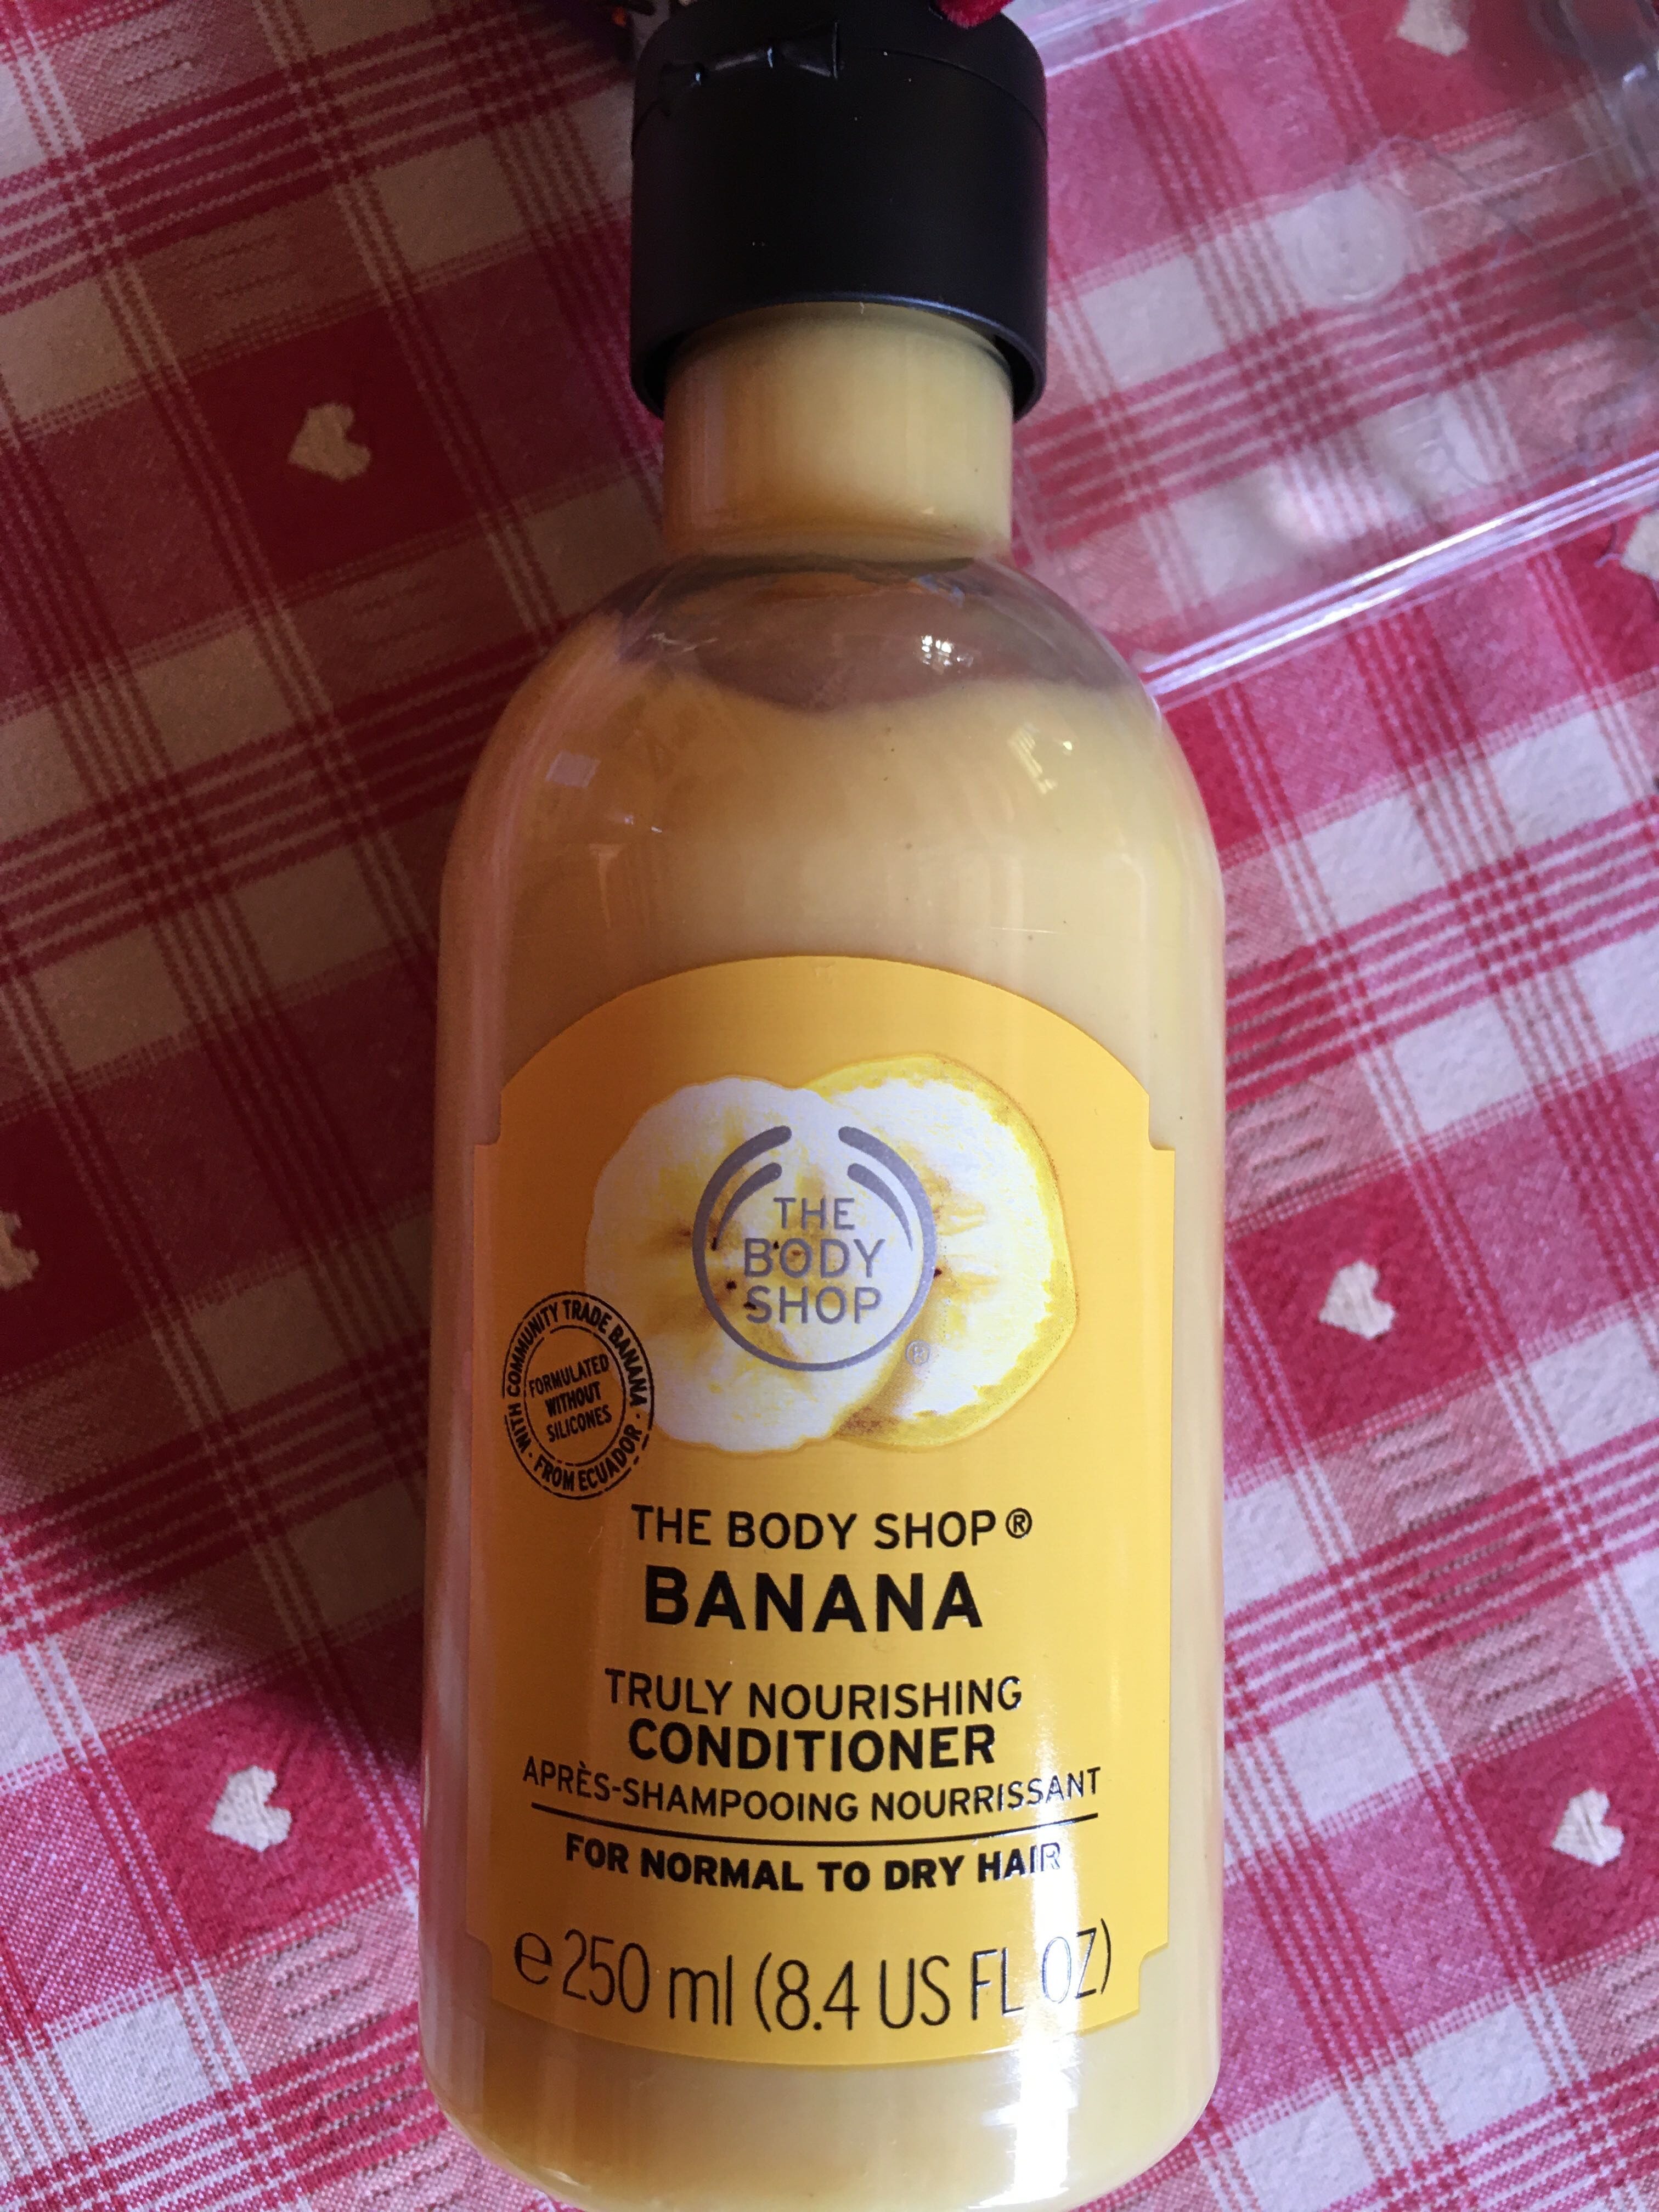 Banane truly nourishing conditionner - Product - fr